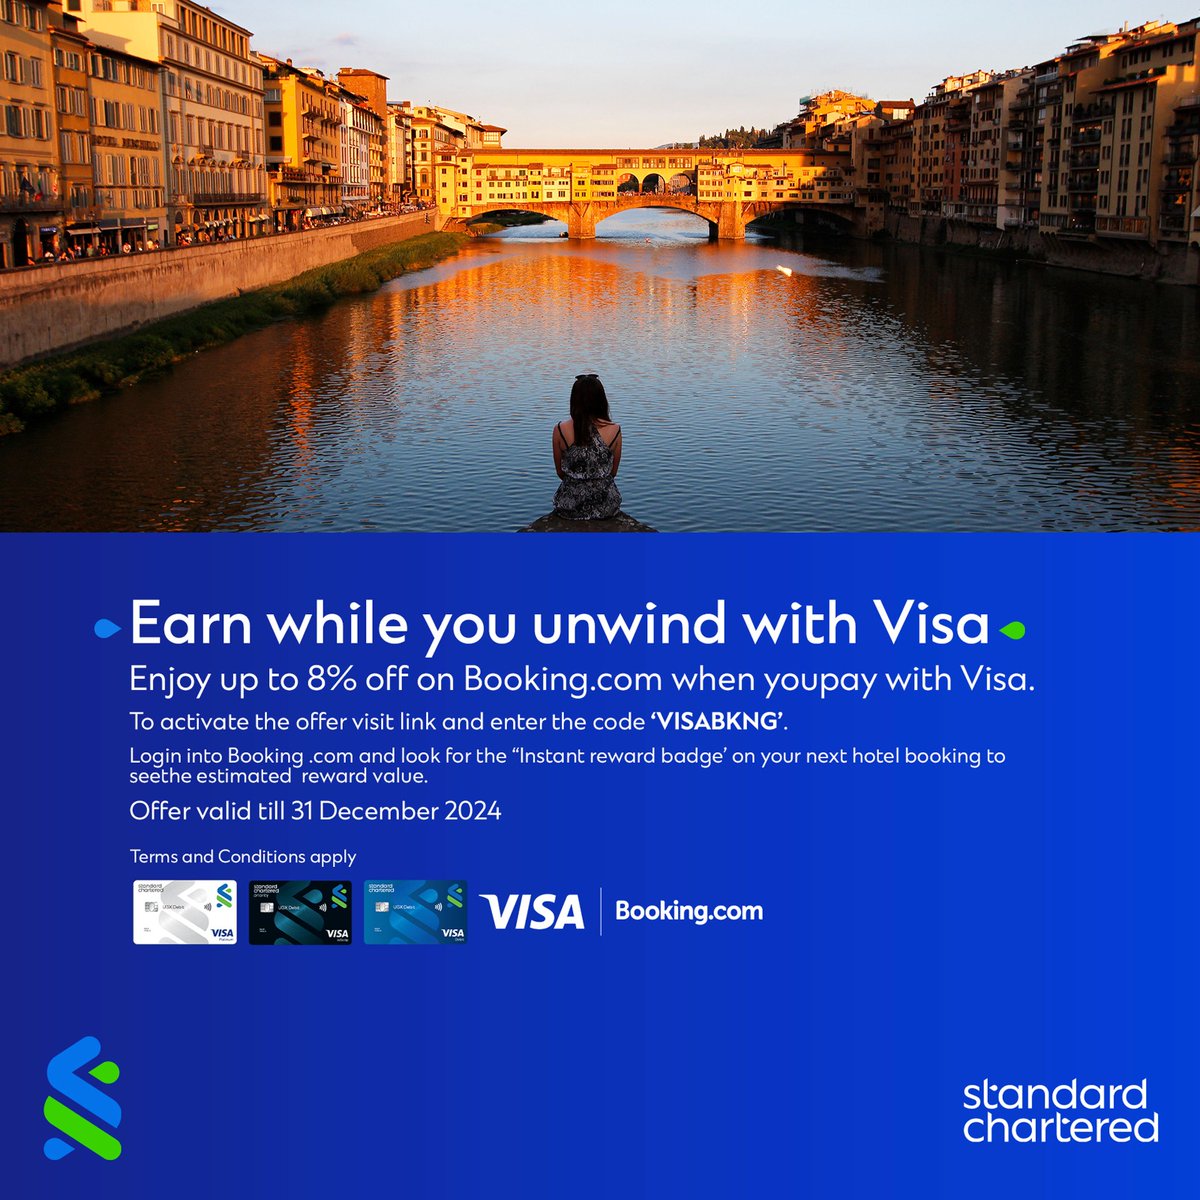 Adventure awaits, and so do the savings! Use your Visa card and code VISABNKG on Booking.com to snag up to 8% off your next getaway. Book now and make memories that last a lifetime! #TravelMoreWithVisa #HereForGood